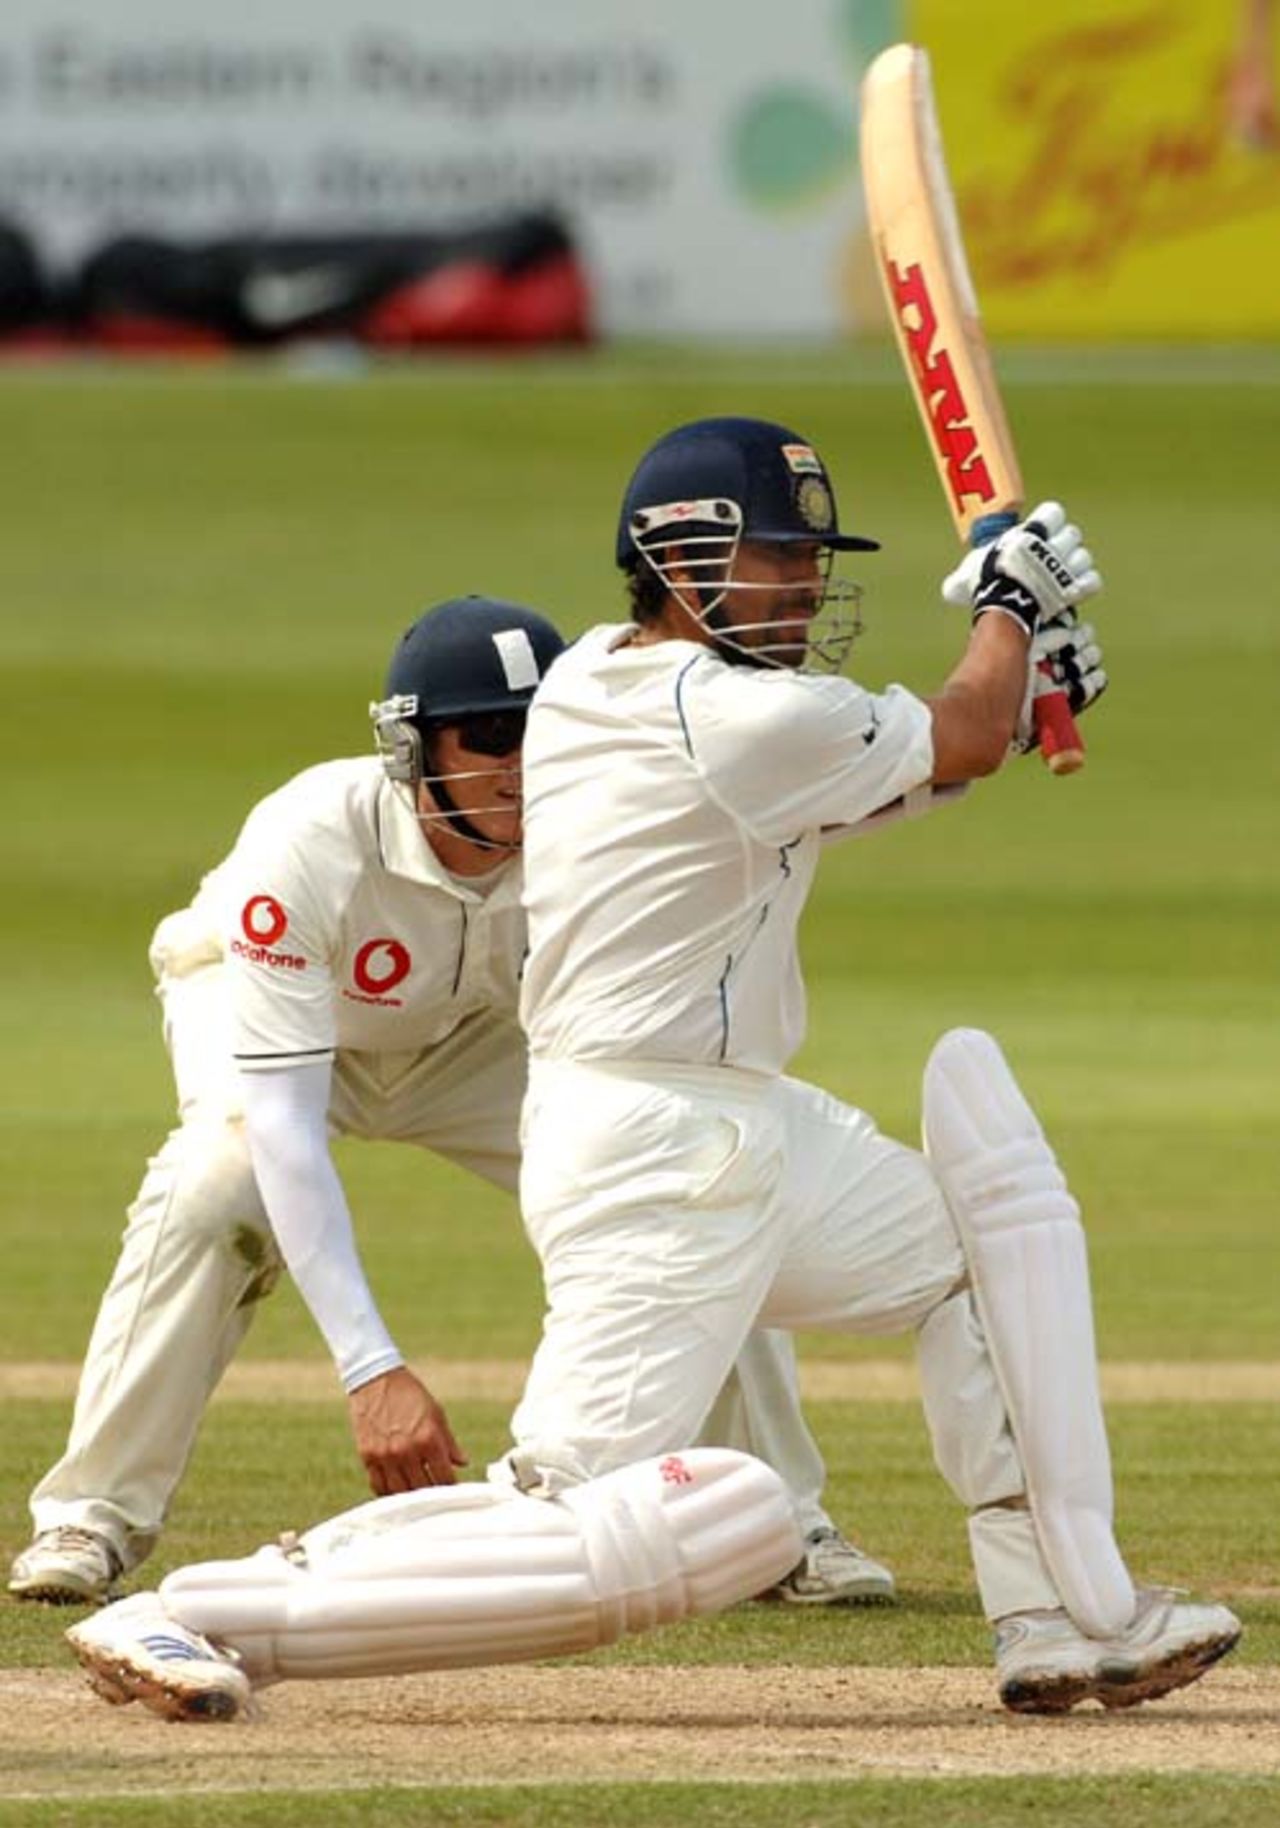 Sachin Tendulkar's masterful 171 included 23 fours and one six, England Lions v Indians, Tour match, 2nd day, Chelmsford, July 14, 2007